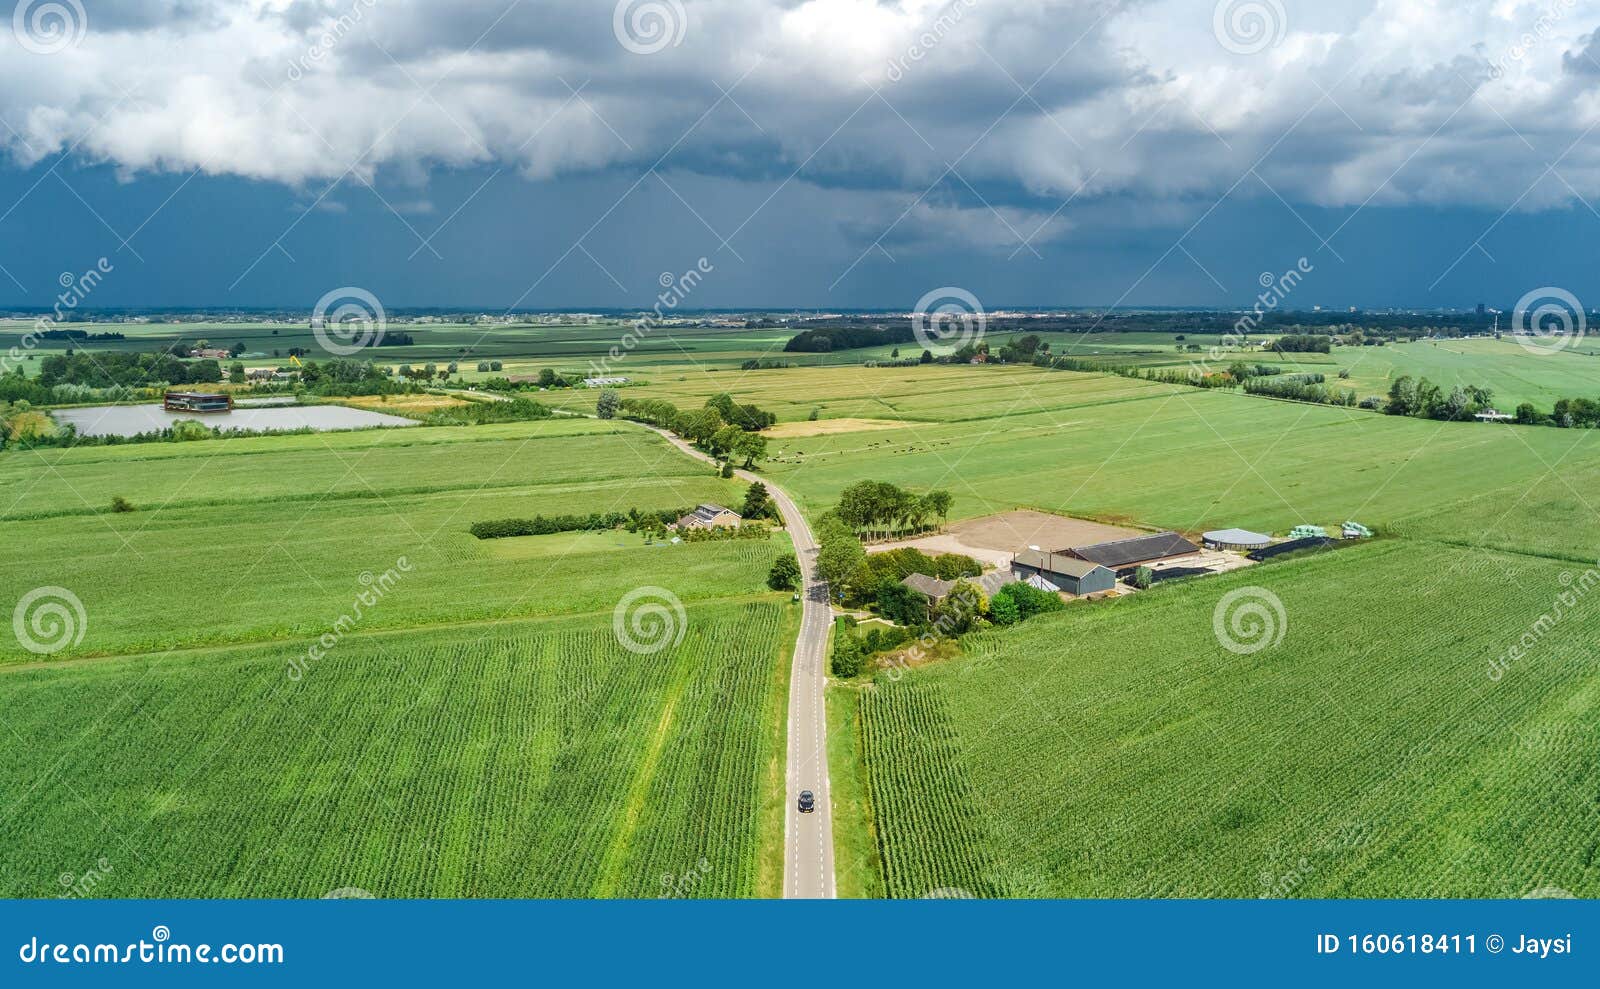 aerial drone view of green fields and farm houses near canal, typical dutch landscape, holland, netherlands